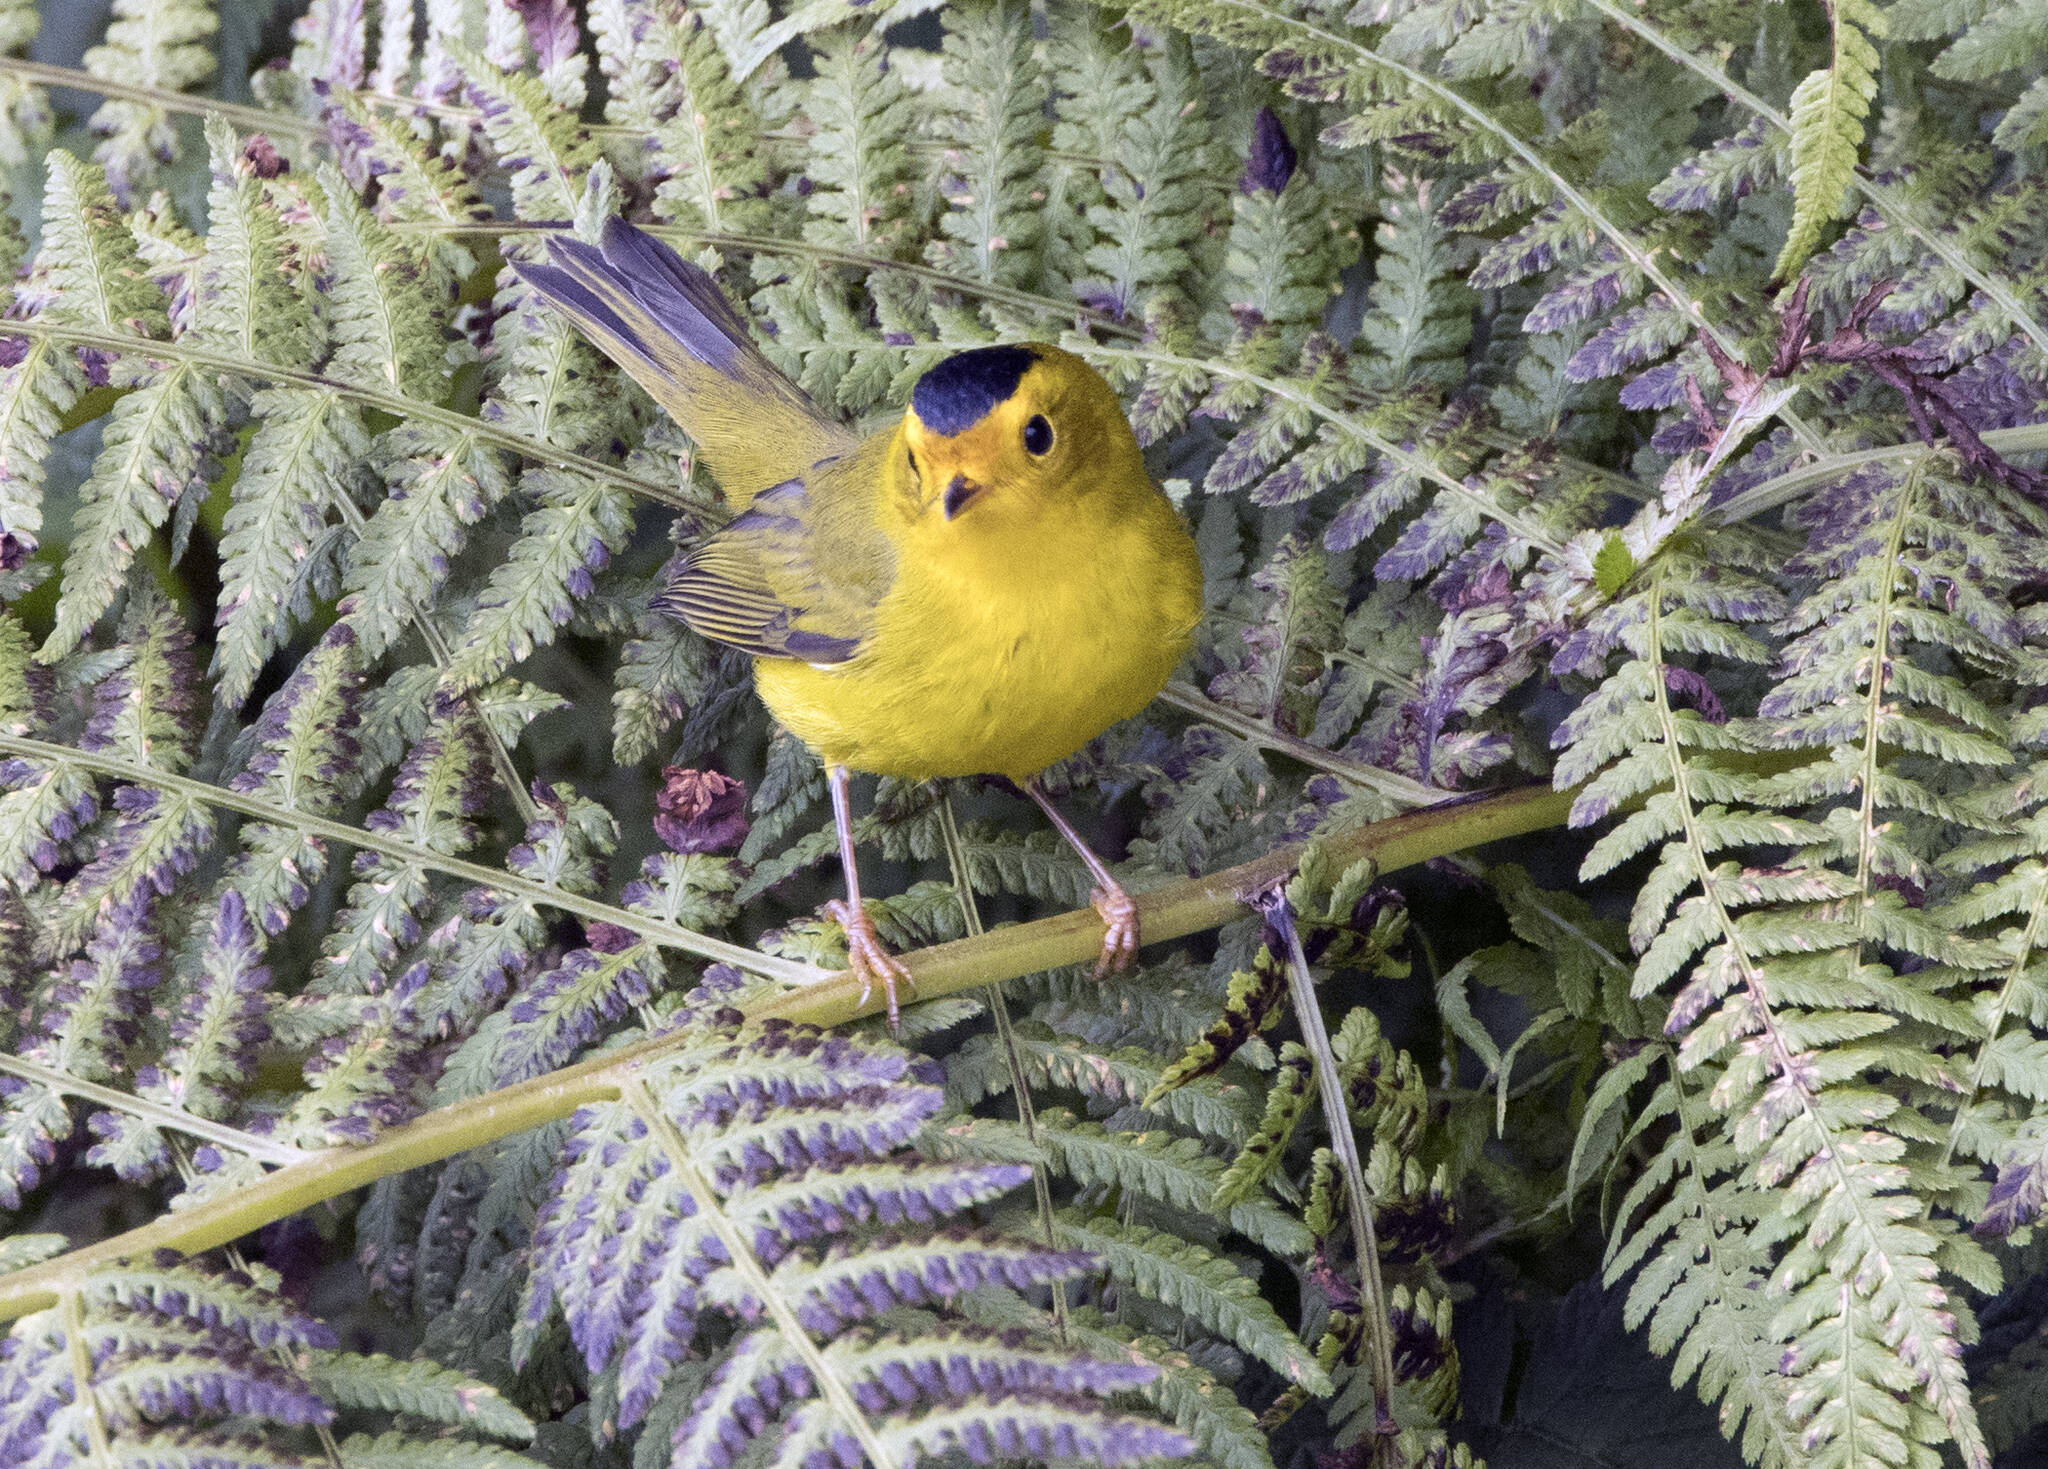 A Wilson warbler on a garden fern at about 16-Mile Glacier Highway on Aug. 17. (Courtesy Photo / Kenneth Gill, gillfoto)